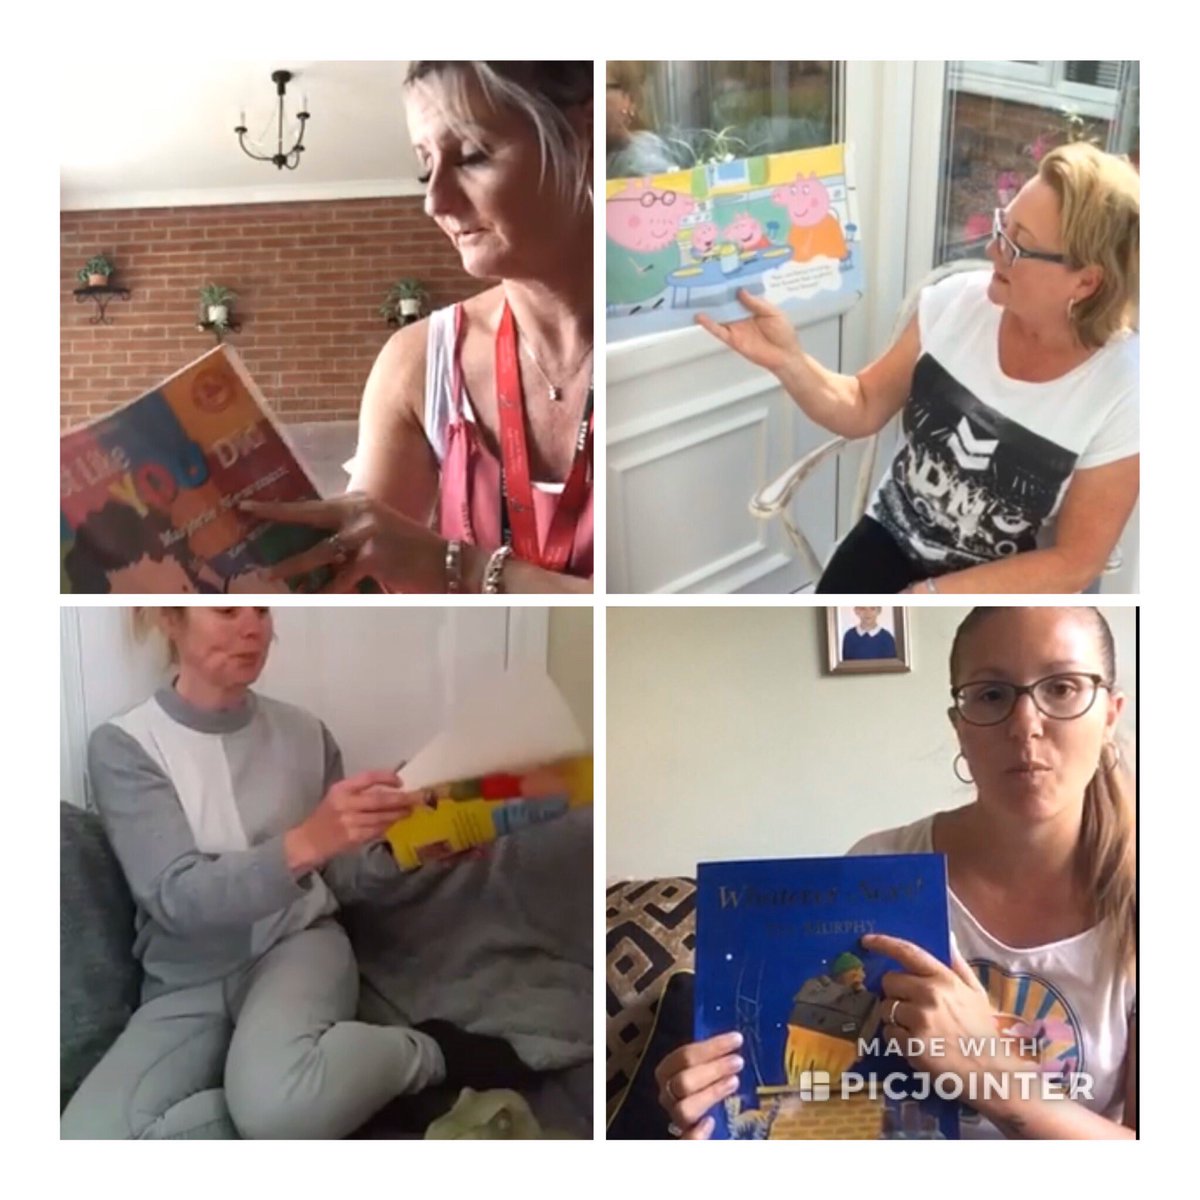 A big shout out to the EYFS Teaching Assistants @BulwellStMarys and @TransformTrust who have took it in turns to read a bedtime story every night to the children #bedtimestory #togetherweachieve #sharingastory #earlyreading